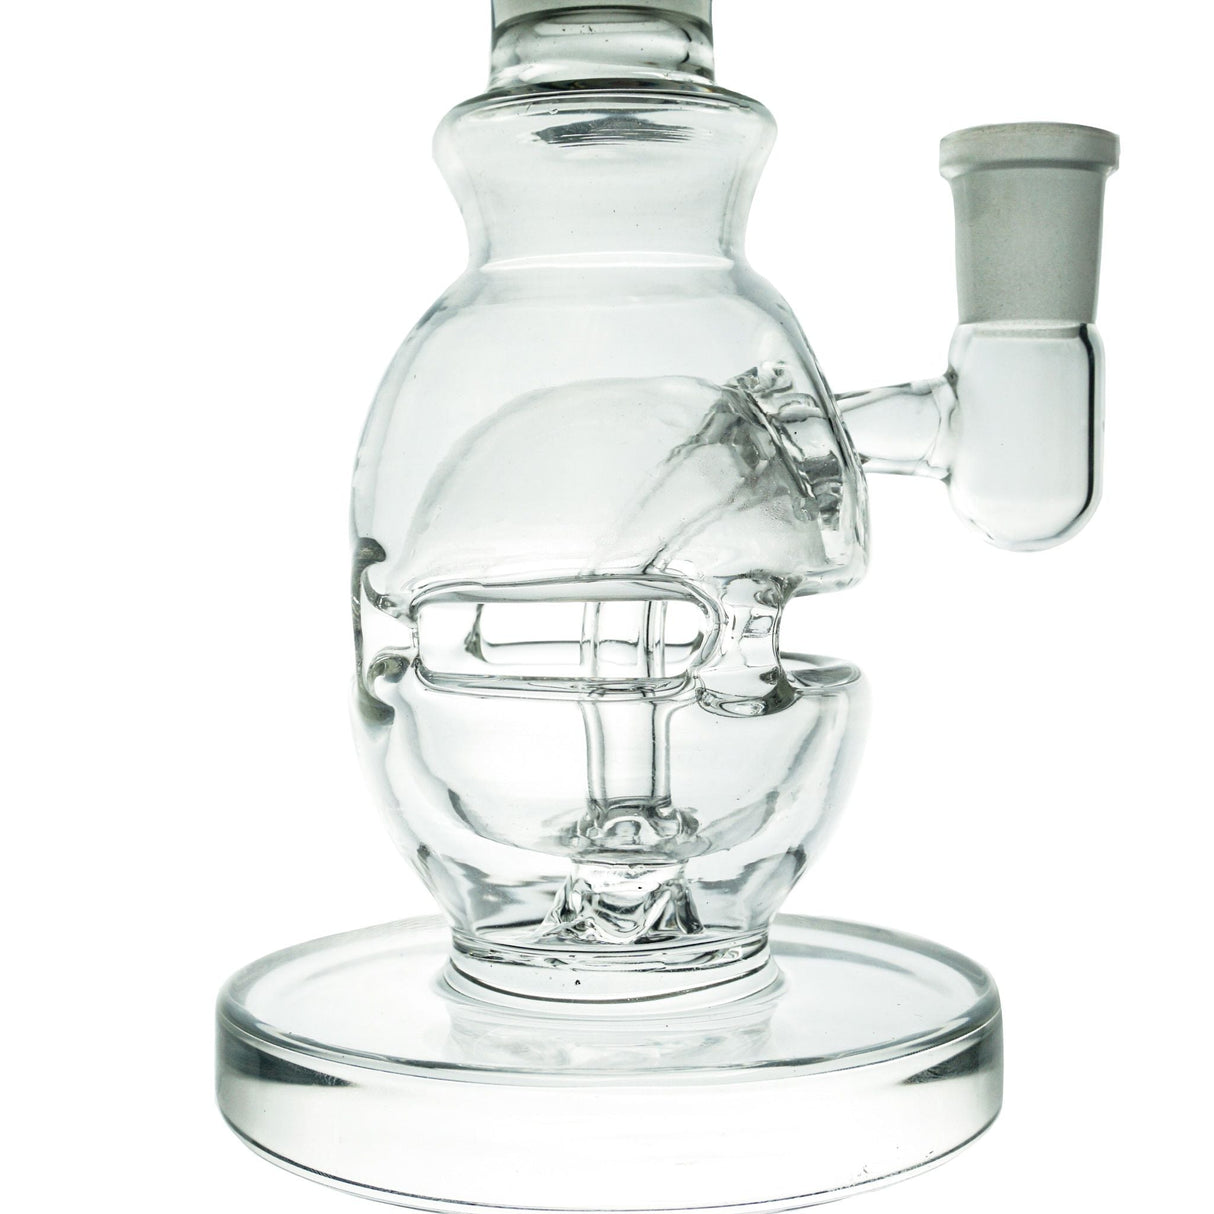 Freeze Pipe Mini Rig with glycerin chamber for cool smoke, front view on white background